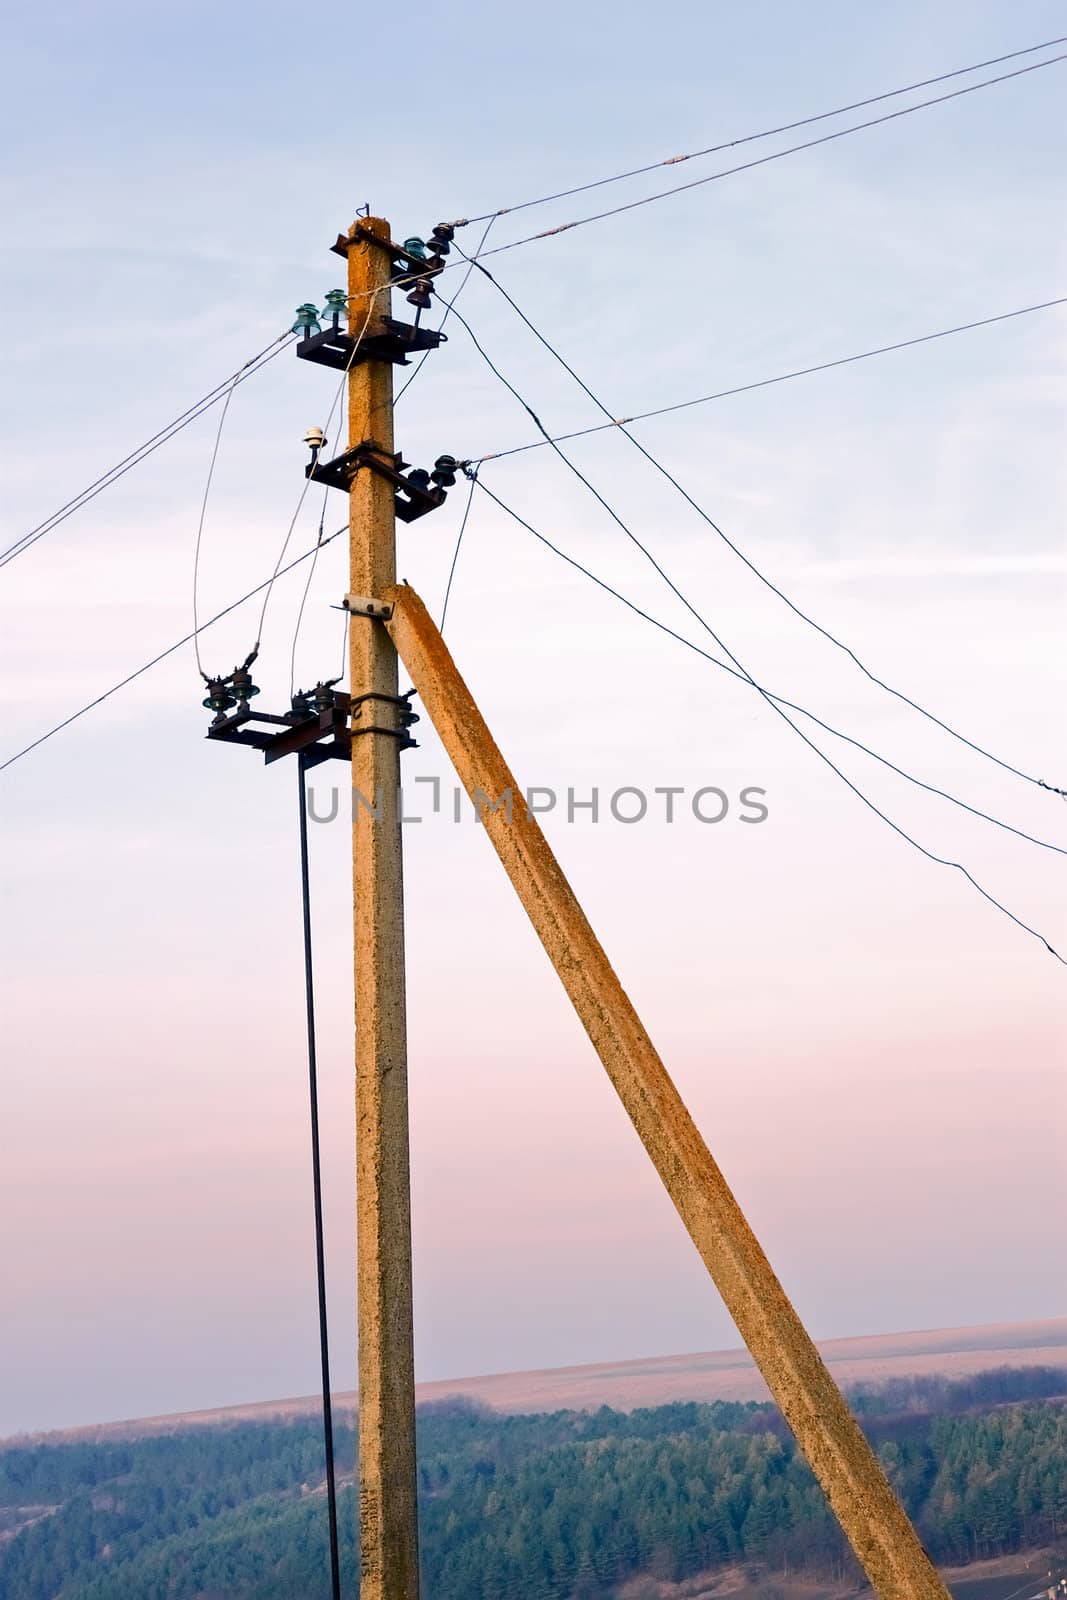 Old electric pole in the rural highlands